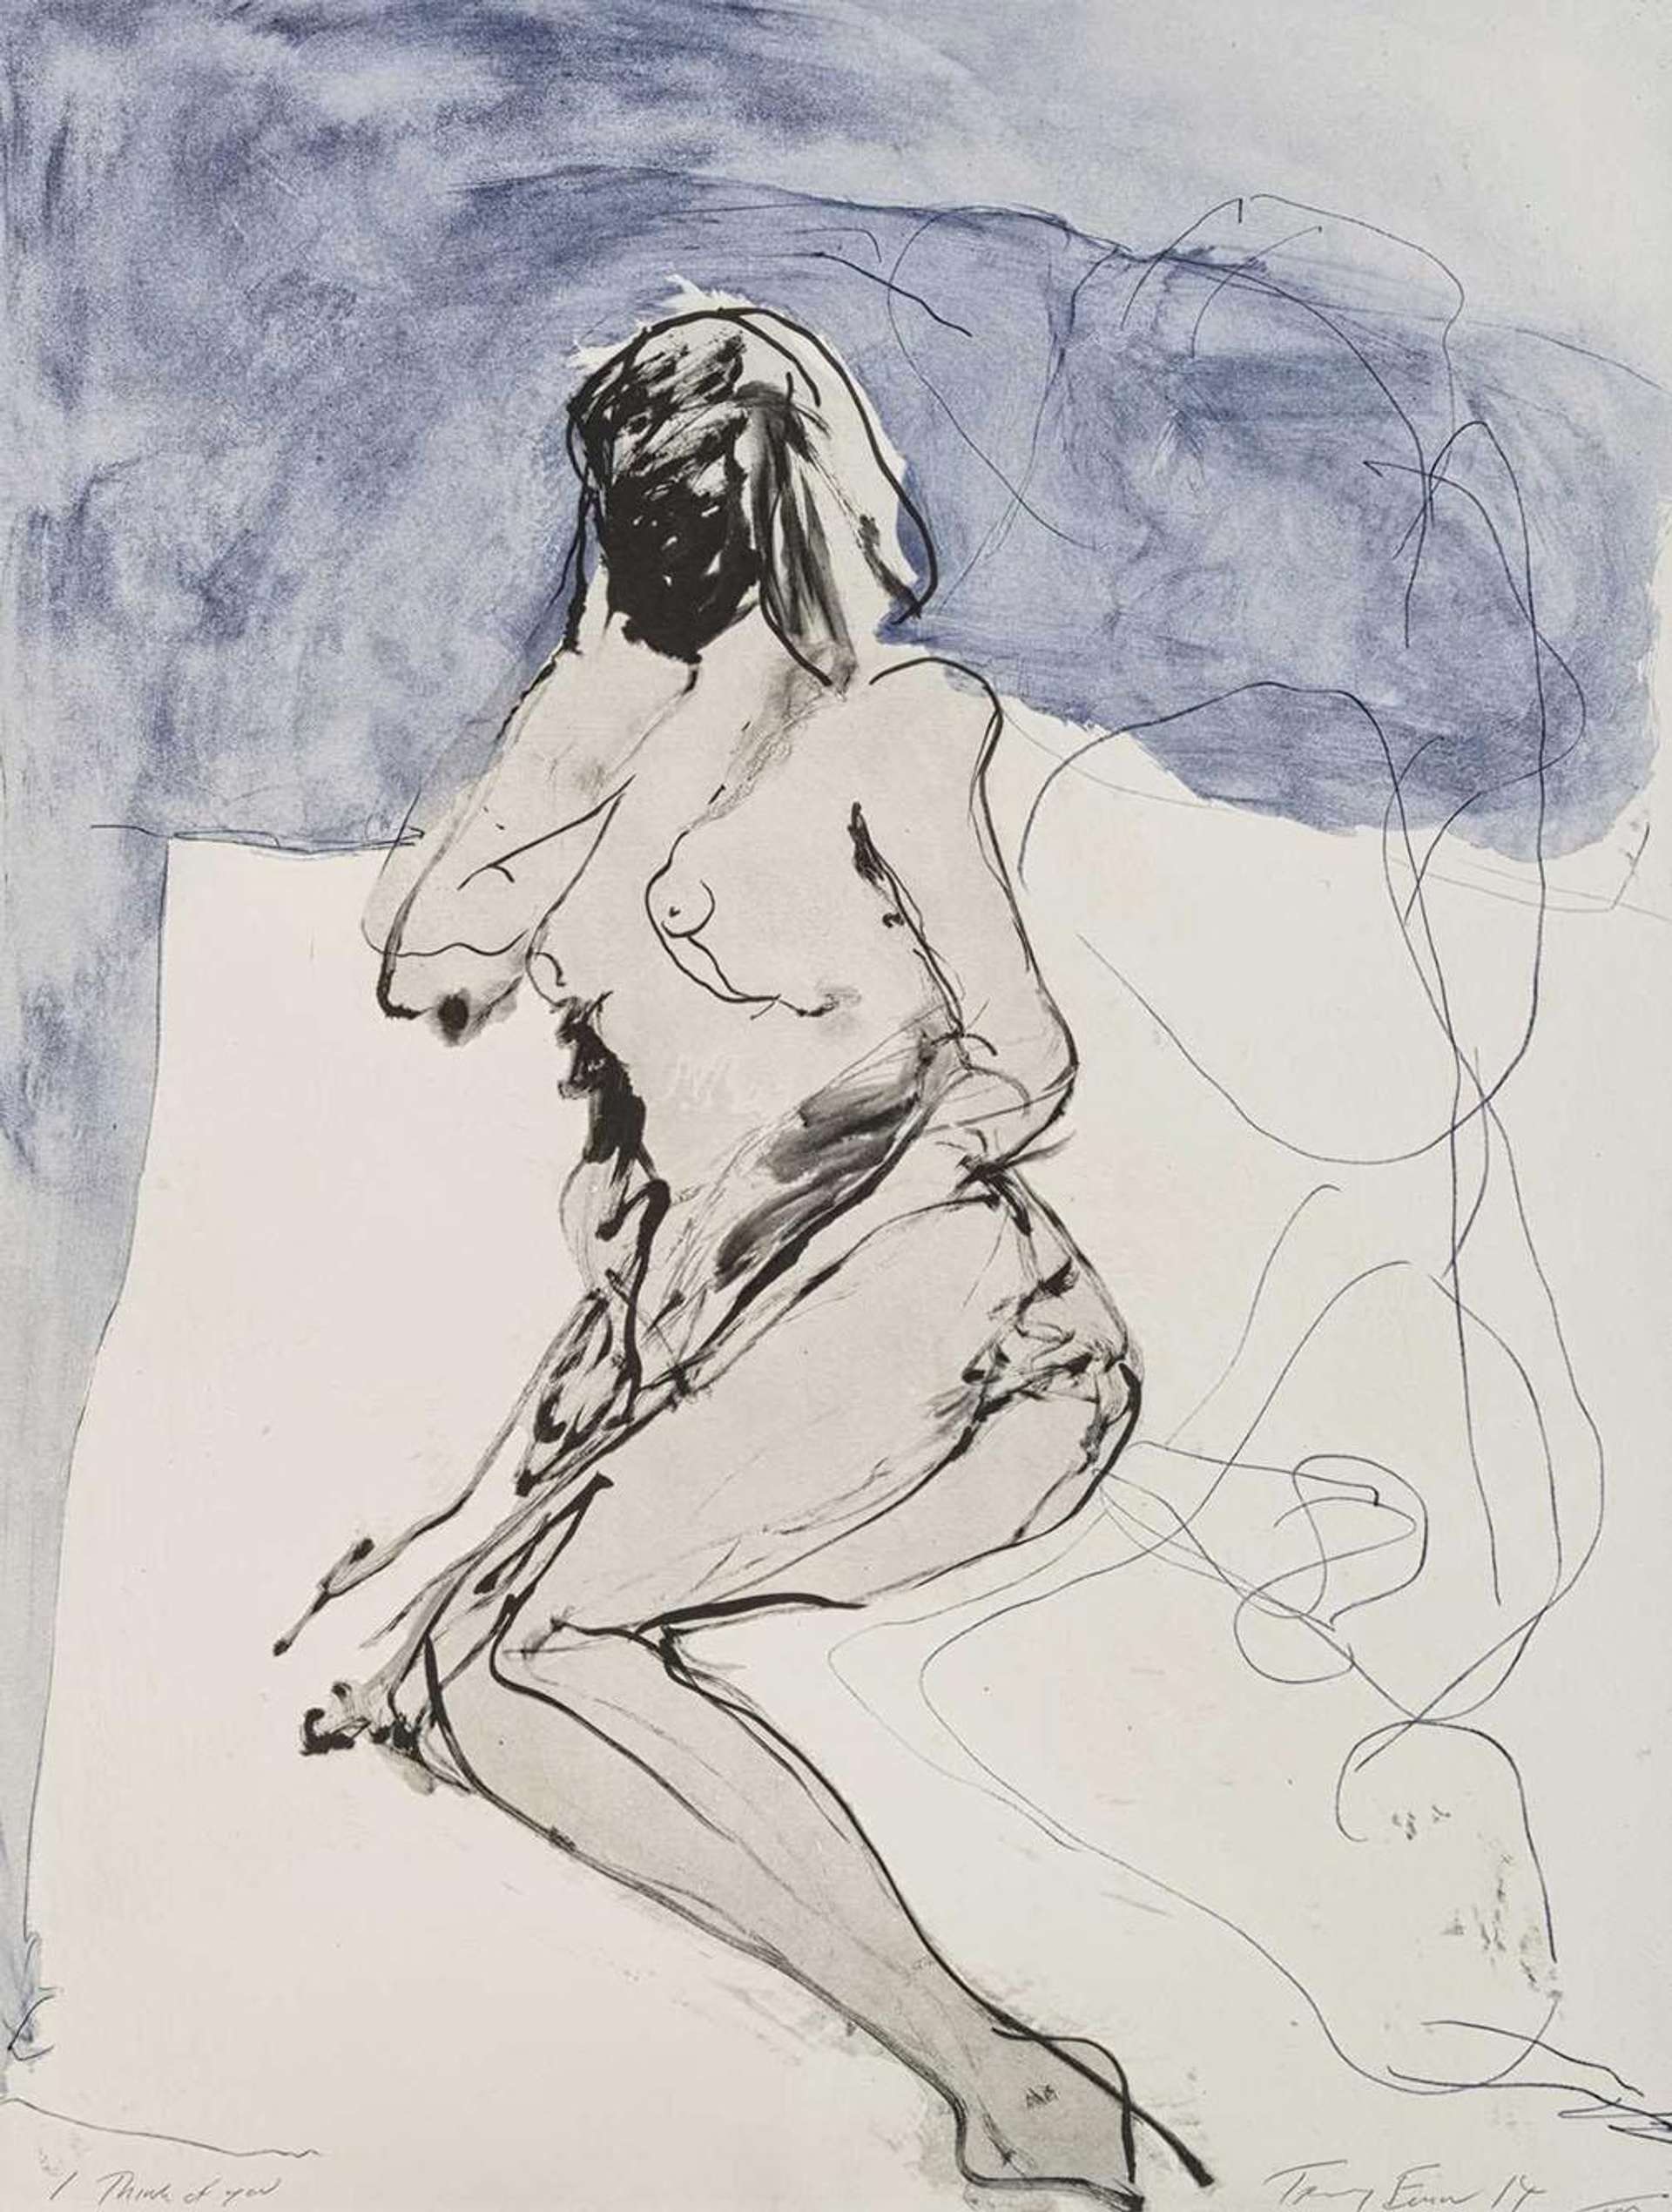 Tracey Emin’s I Think Of You. A lithograph of a drawing of a side profile view of a nude woman lying down on a surface against a blue background.